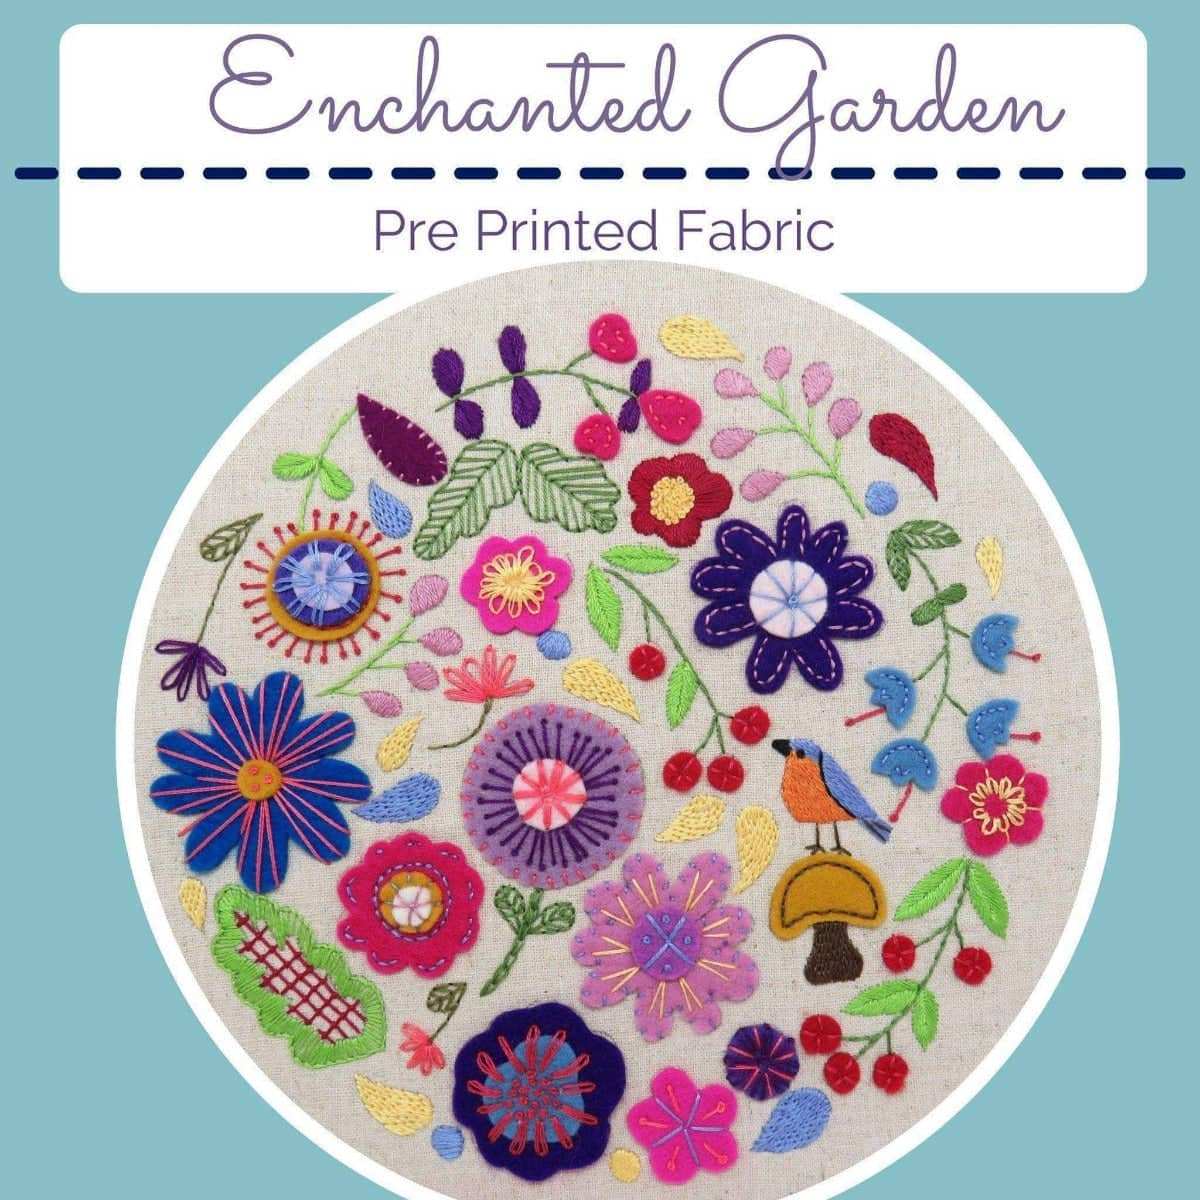 Enchanted Garden, Pre Printed Fabric Panel PLUS PDF Pattern , Pre Printed Fabric Pattern , StitchDoodles , embroidery hoop kit, embroidery kits for adults, embroidery kits for beginners, flower embroidery, hand embroidery, hand embroidery fabric, modern embroidery kits, unique embroidery kits , StitchDoodles , shop.stitchdoodles.com